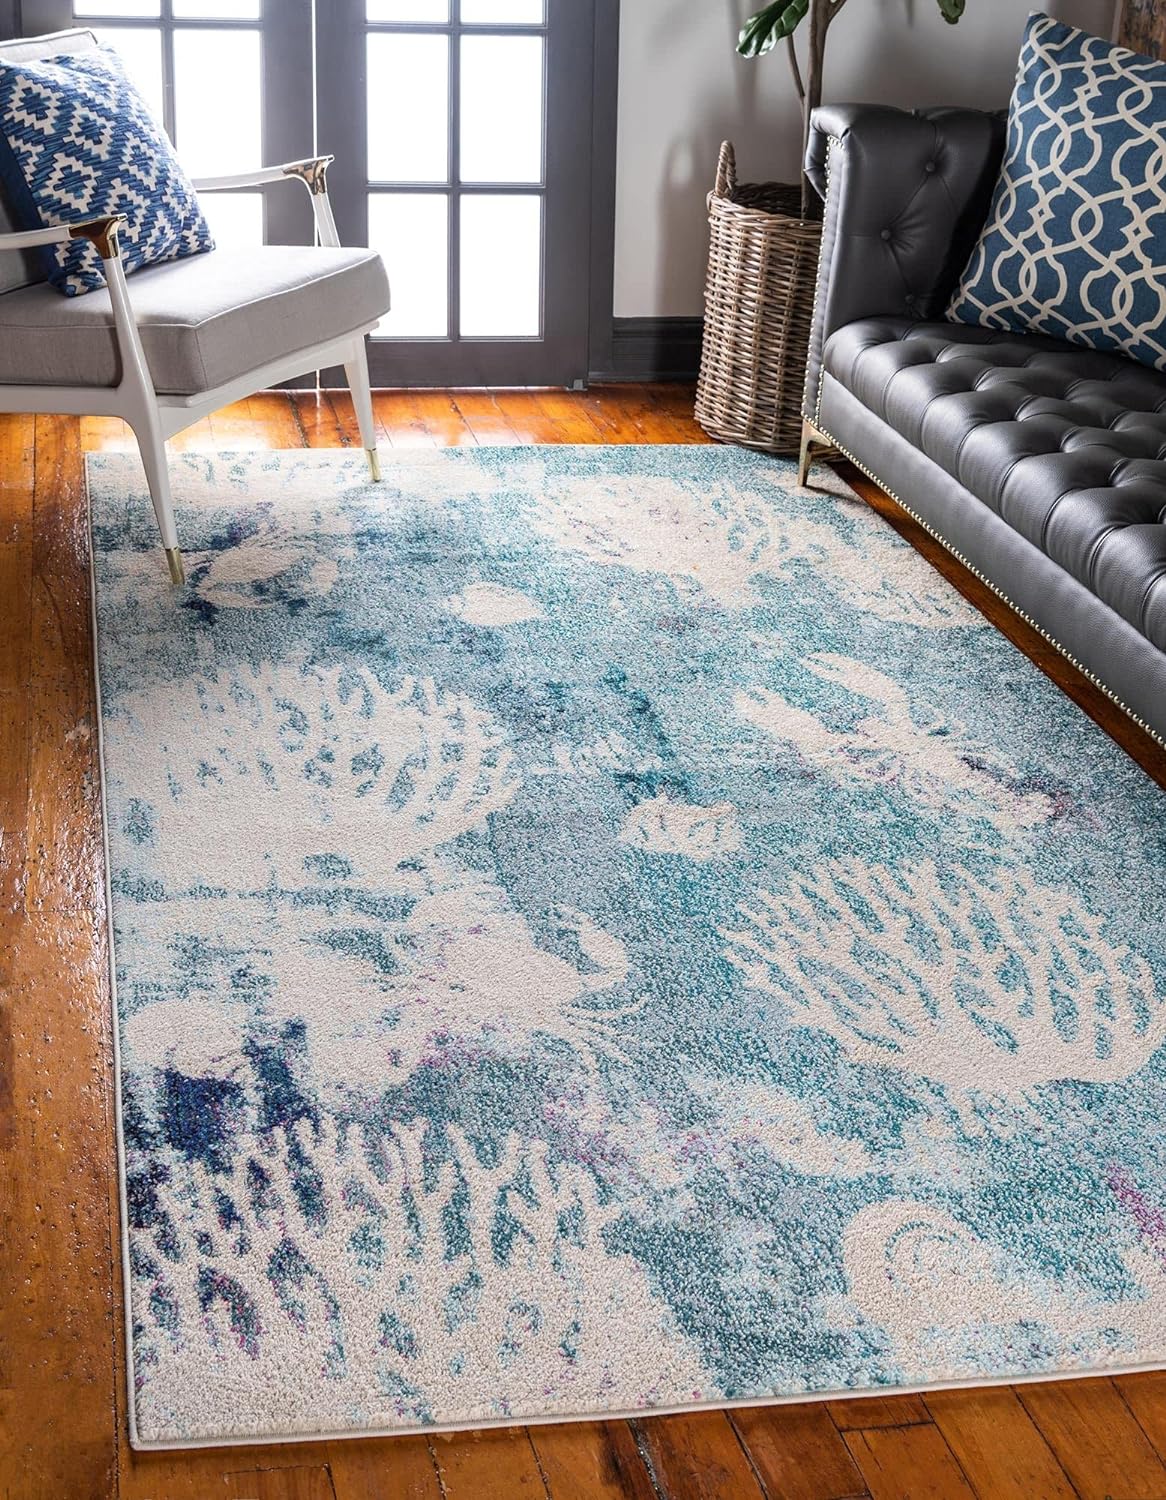 I am in love with this rug. It has all the colors I wanted, it' soft and the 8 x 10 size is the perfect fit for my living room. It really pulls the whole room together. It is definitely worth the cost so far.